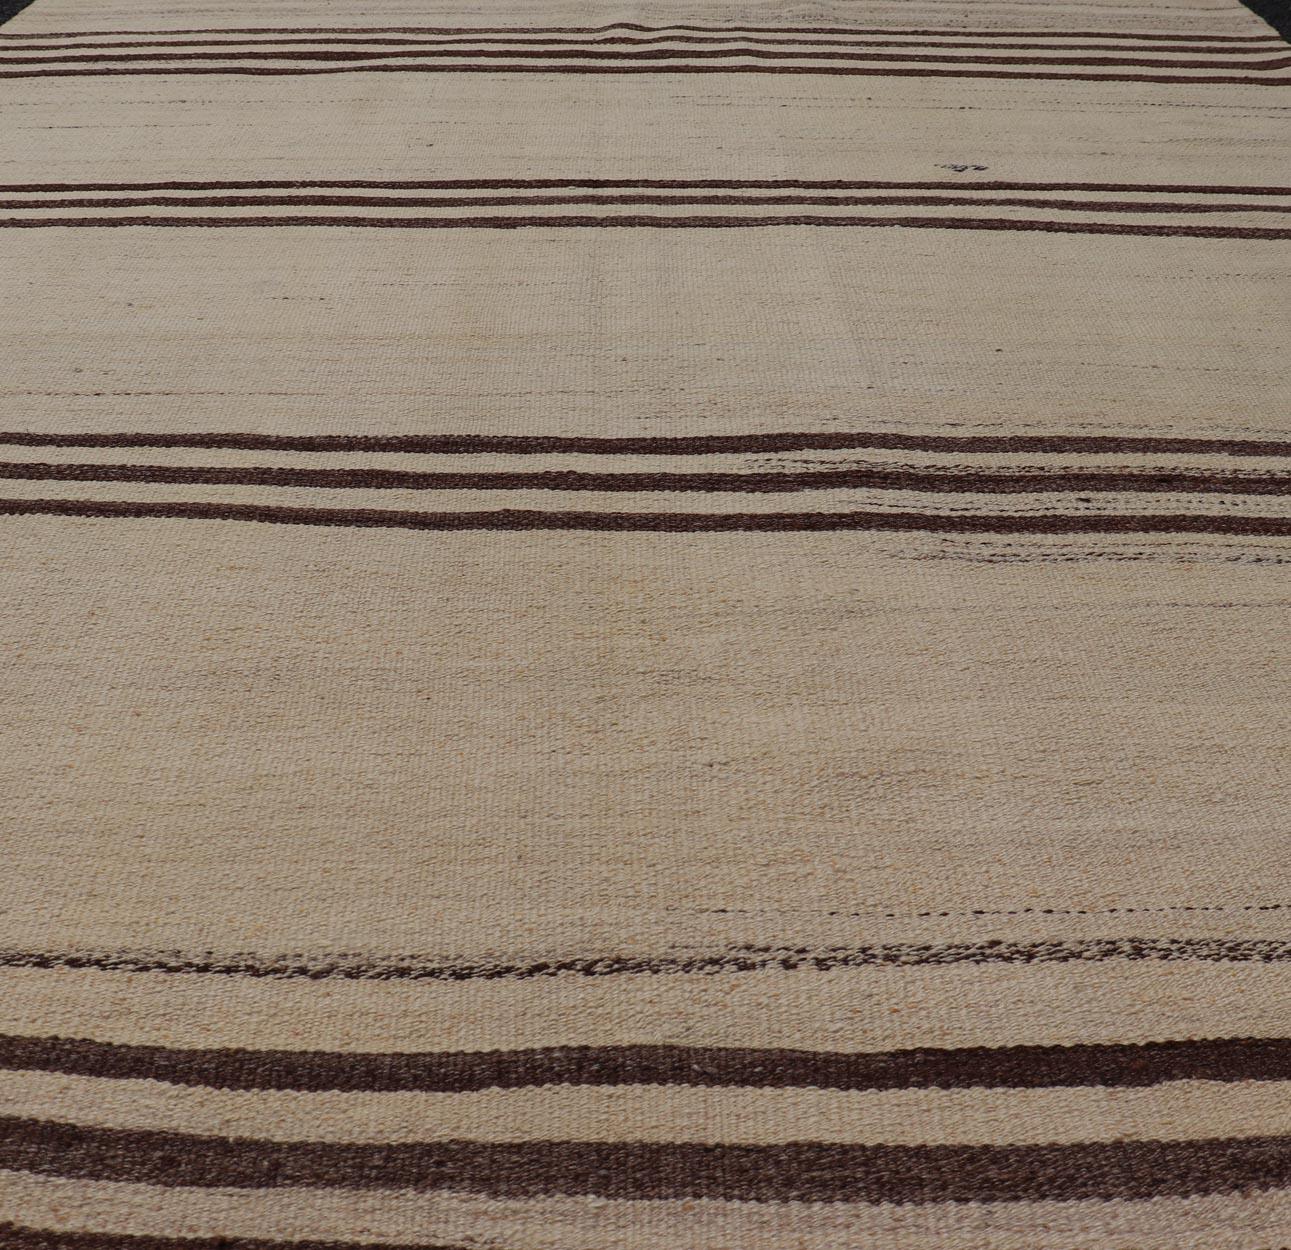 Kilim Turkish Vintage Flat-Weave in Brown and Cream with Stripe Design For Sale